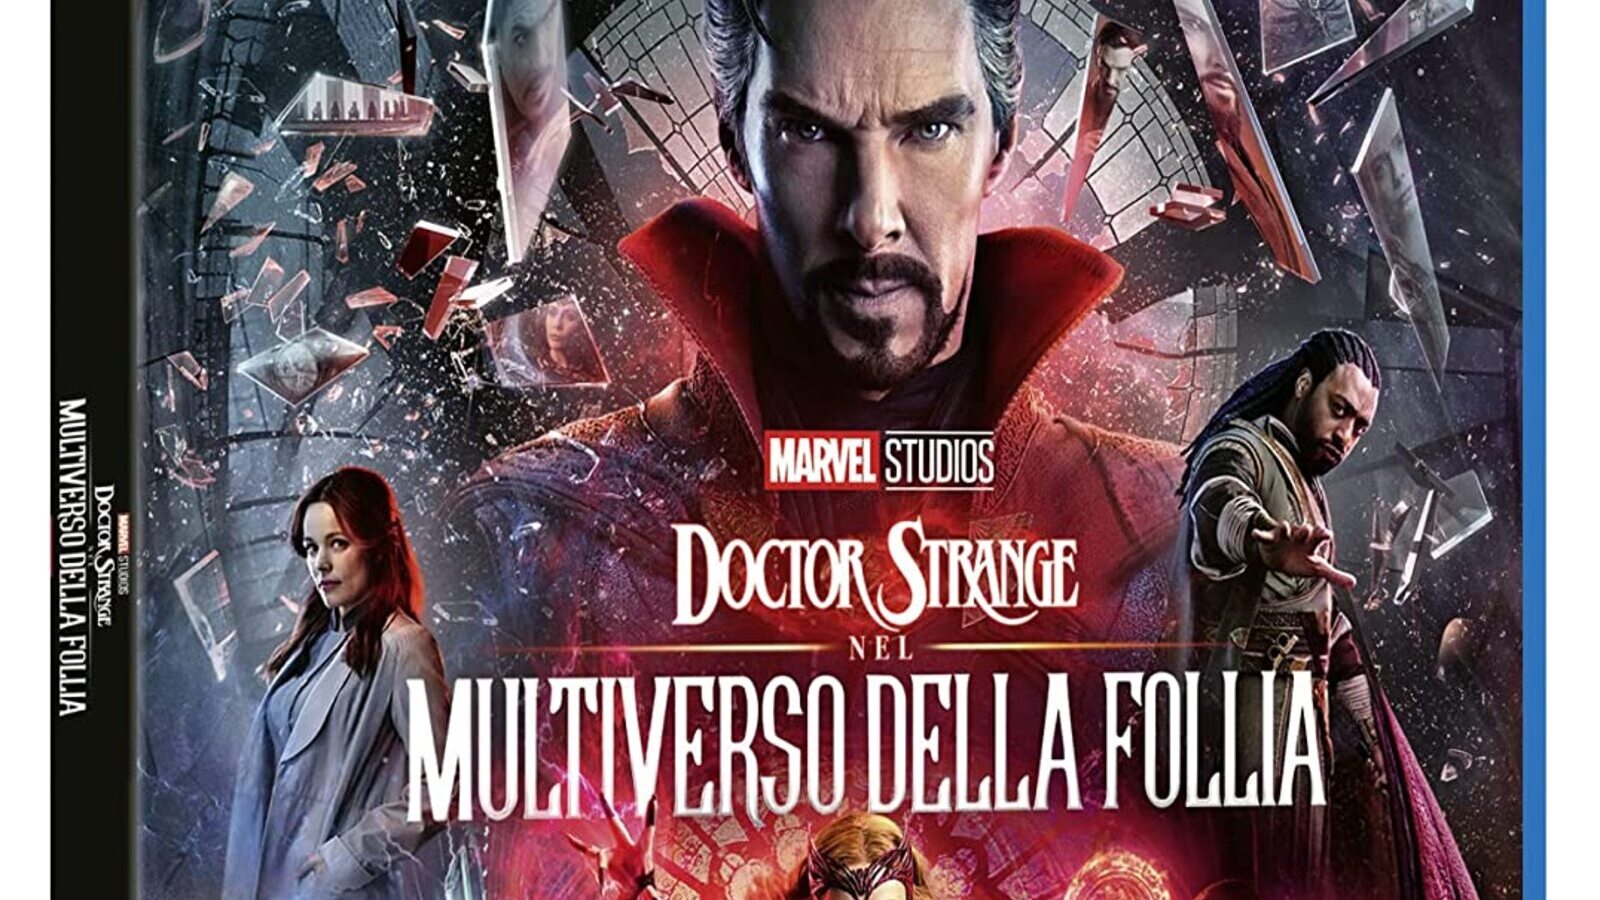 Doctor Strange in the Multiverse of Madness: Blu-ray of Sam Raimi's Movie is on offer at Amazon